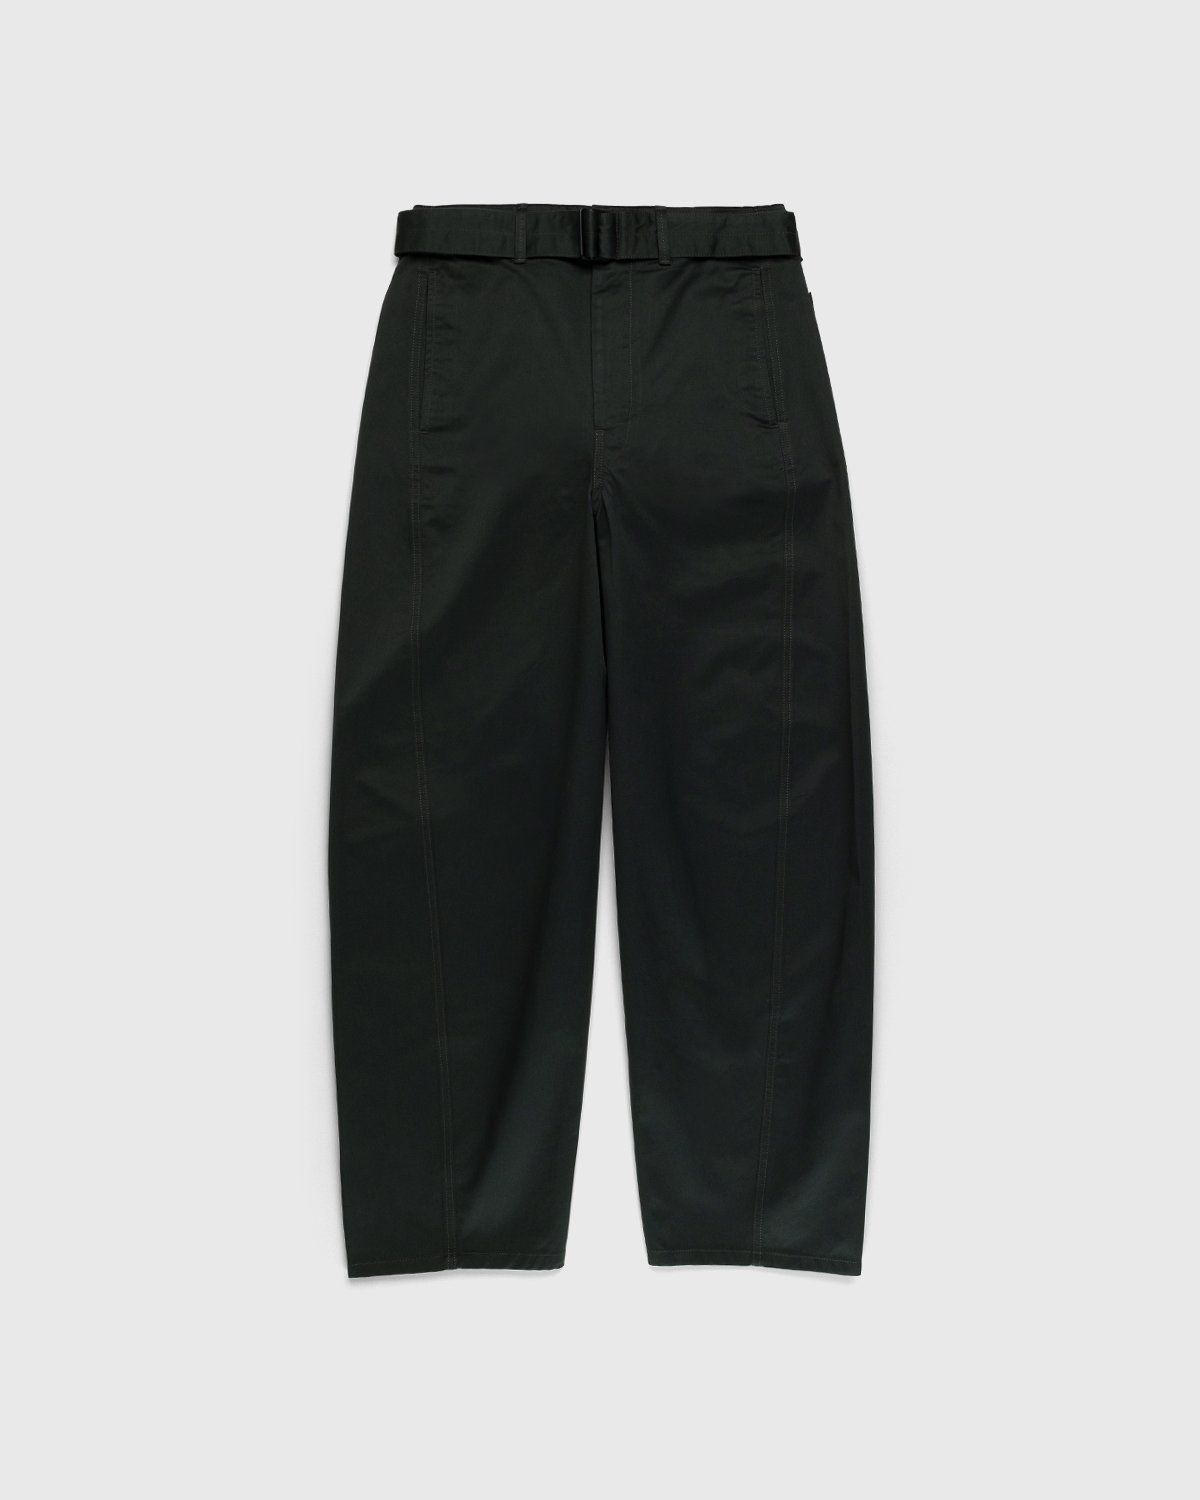 Lemaire – Twisted Belted Pants Dark Slate Green - Image 1